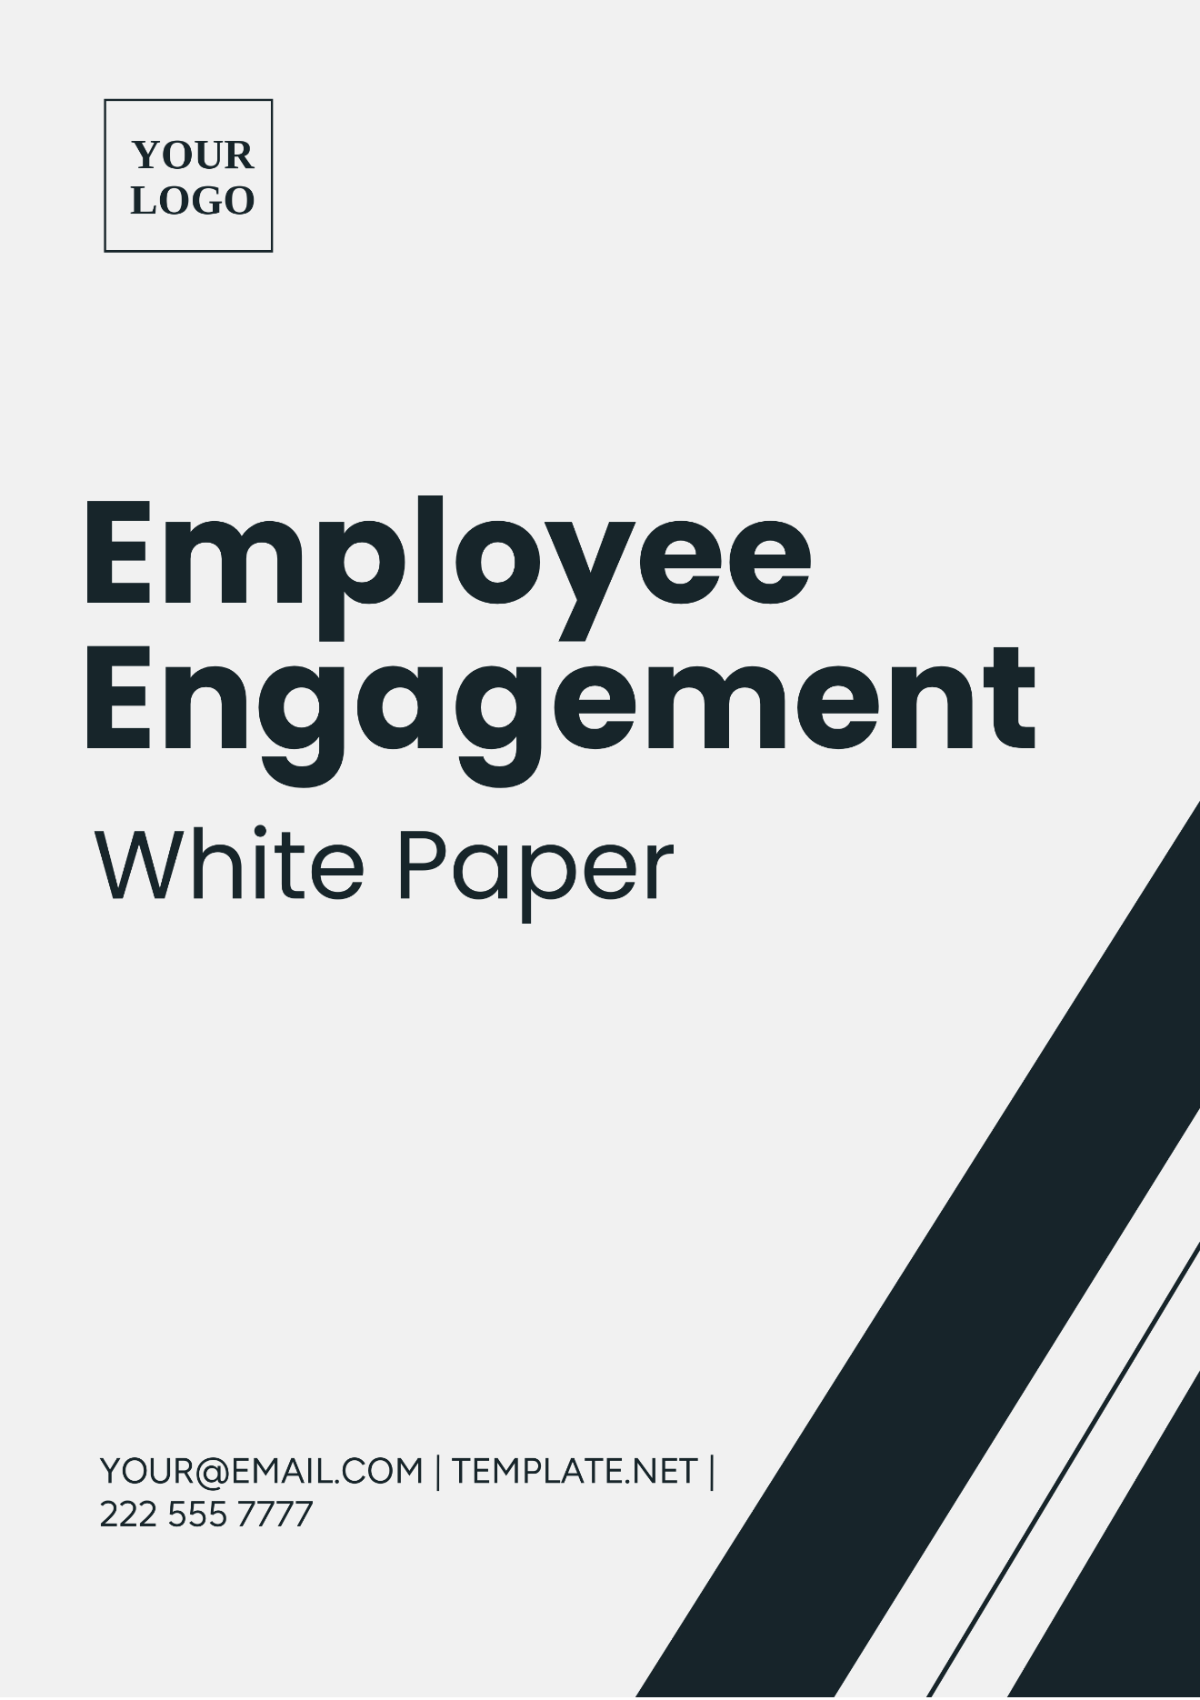 Employee Engagement White Paper Template